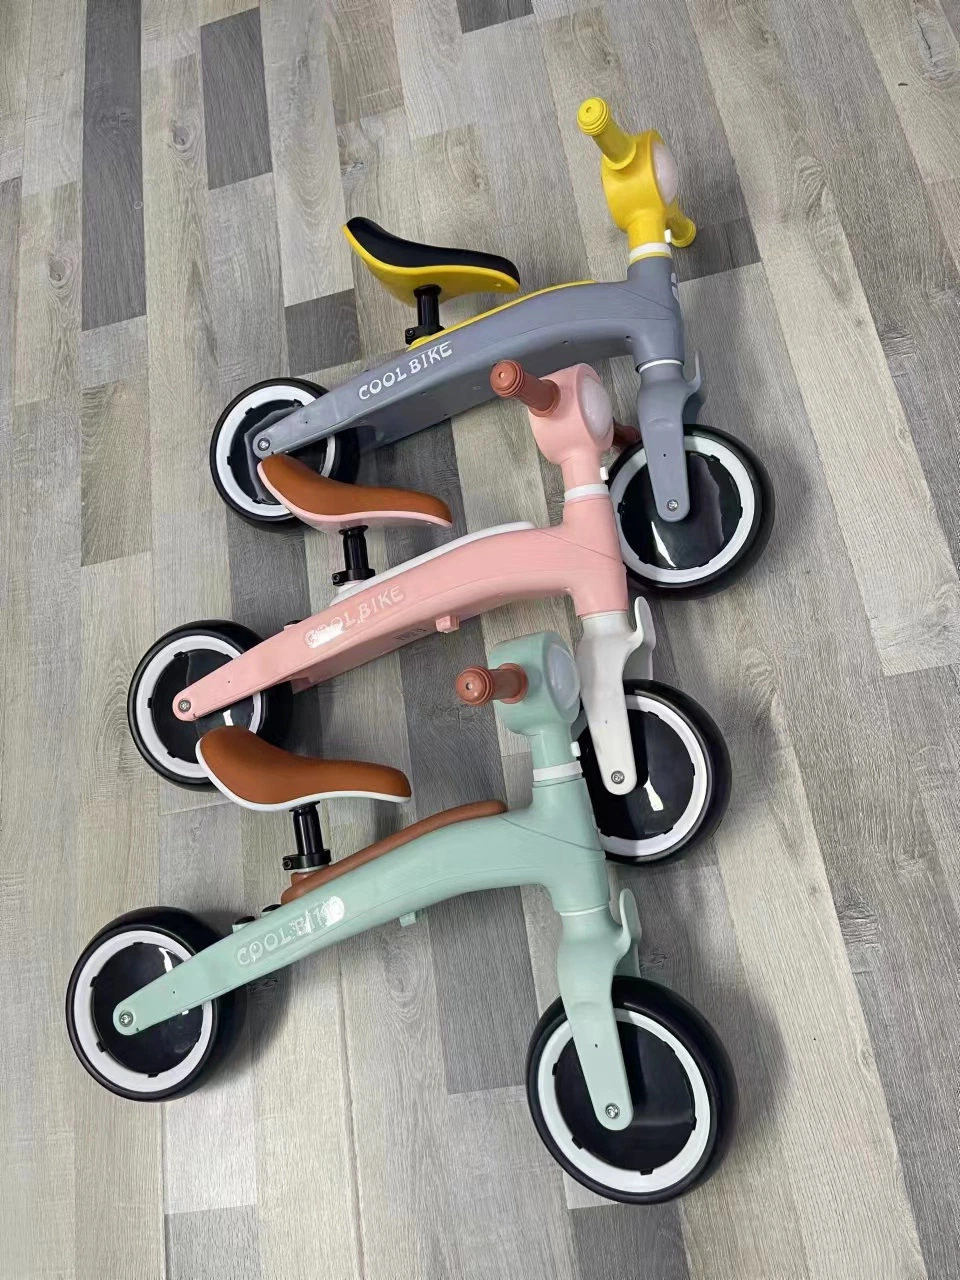 Hot Sell Factory Wholesale Mini Baby Balance Bike / Baby Scooter Child